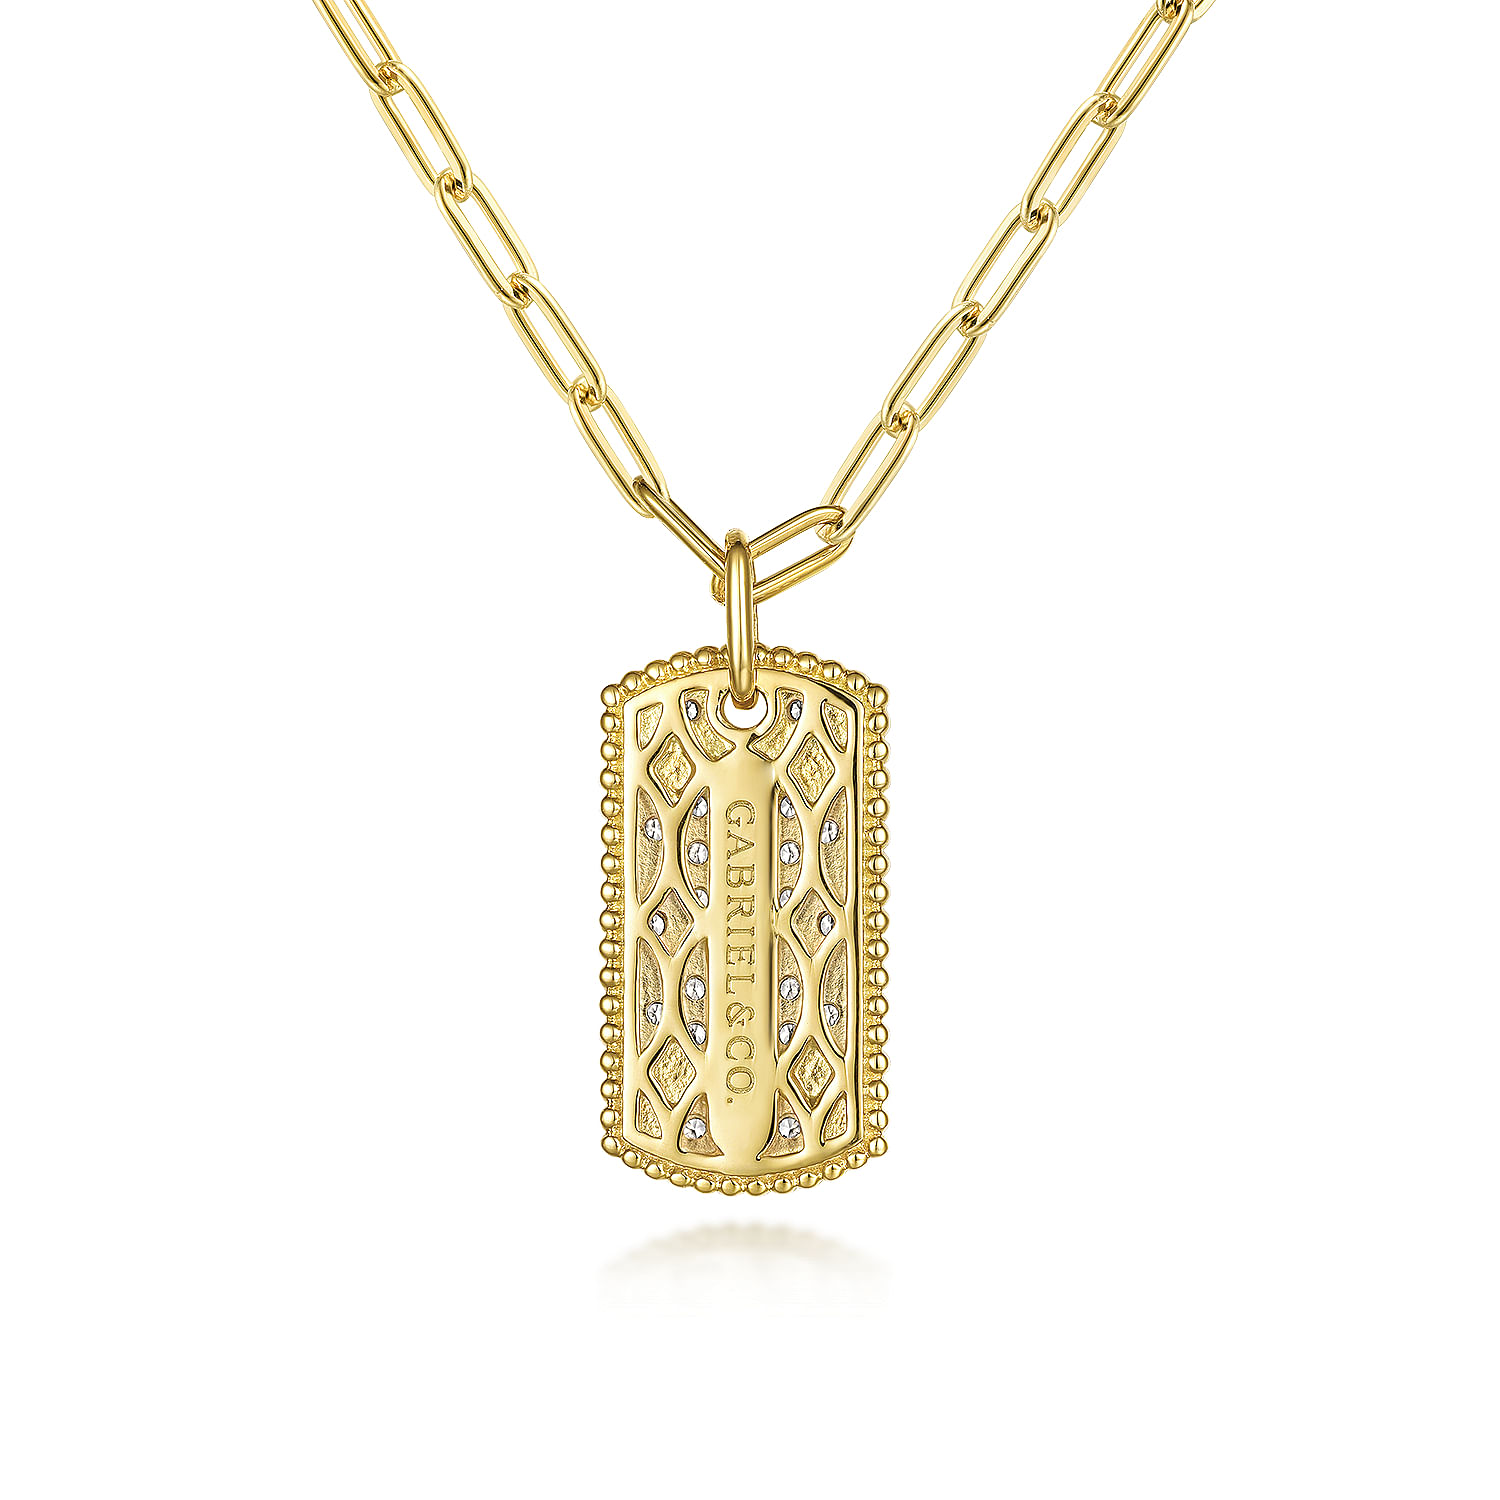 18 inch 14K Yellow Gold Diamond Pave' Dog Tag Hollow Chain Necklace